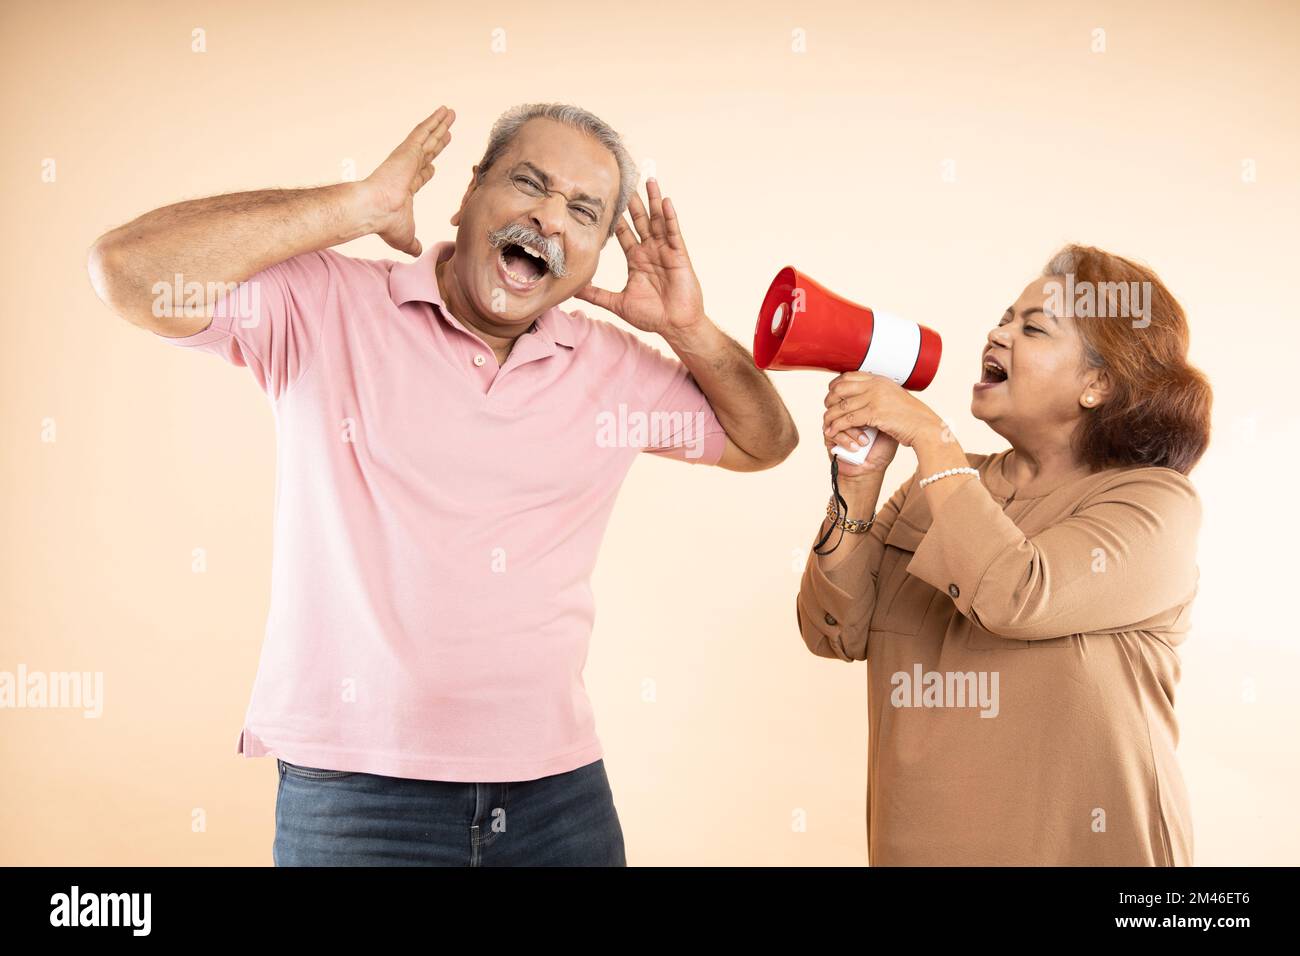 Senior indian woman scream or shouting at man in megaphone isolated on beige background. announce discounts sale. Asian wife tease husband. Stock Photo